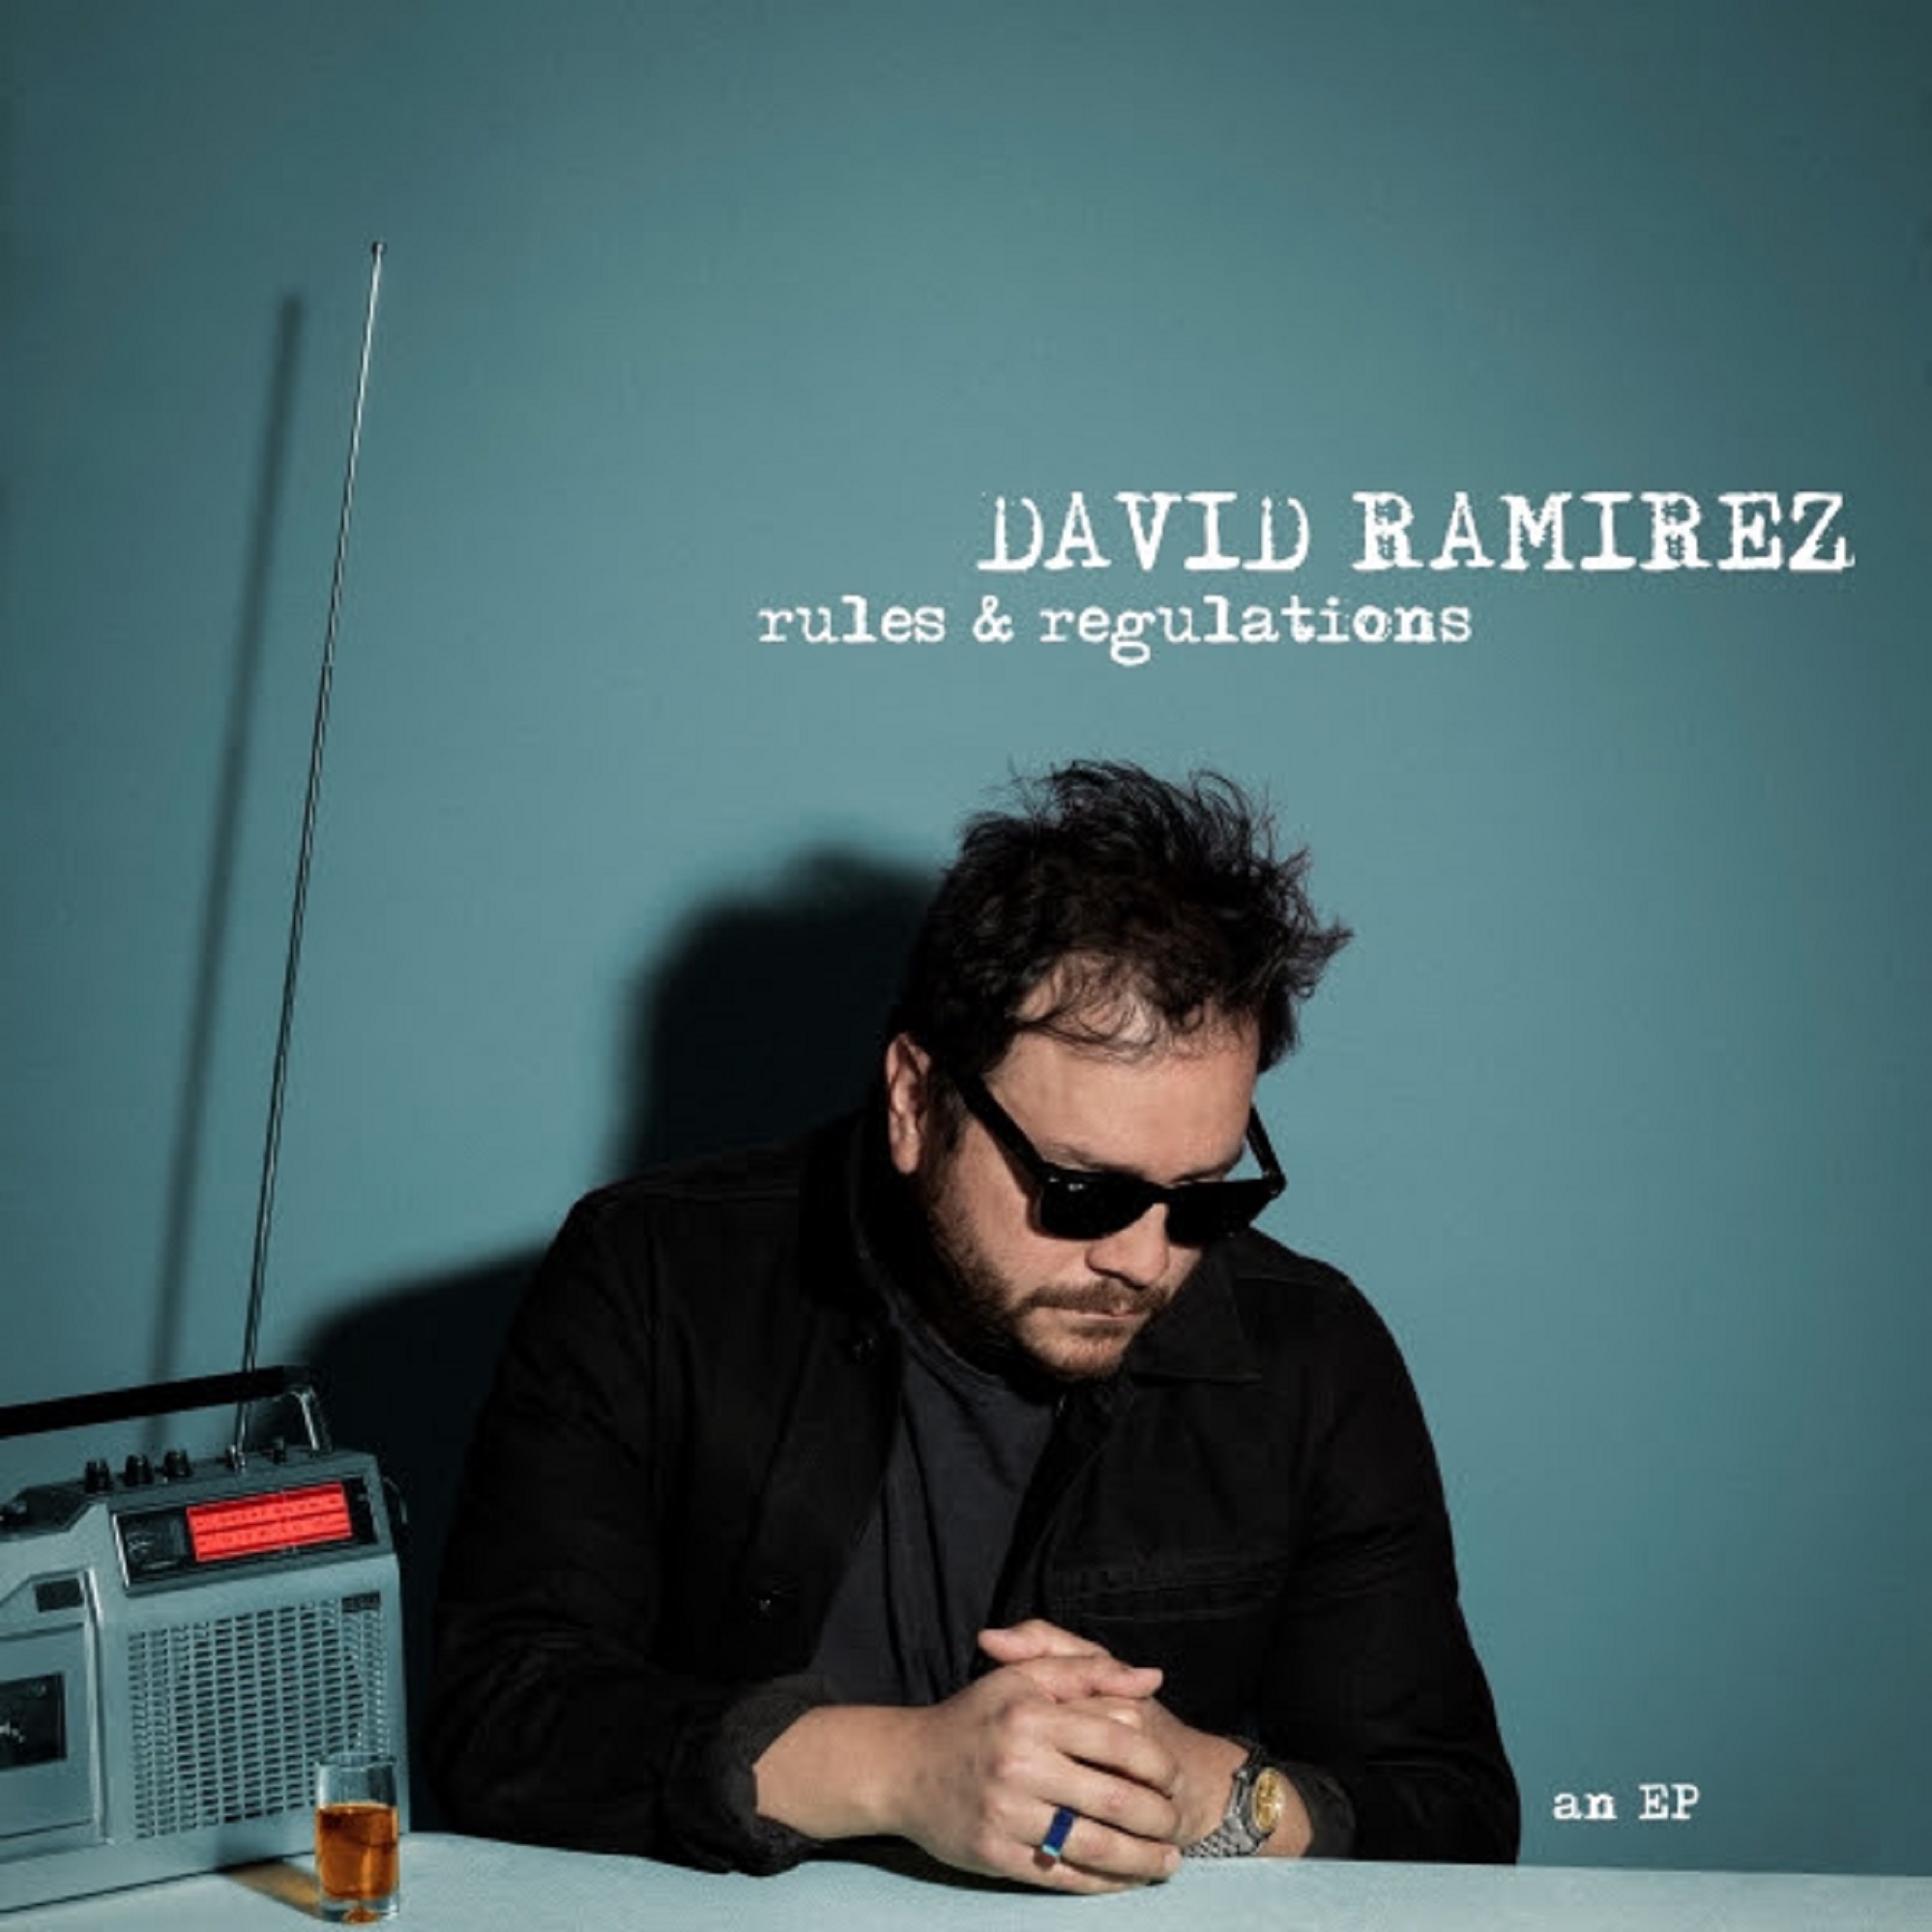 David Ramirez Announces New EP, Rules and Regulations, Due Out February 25